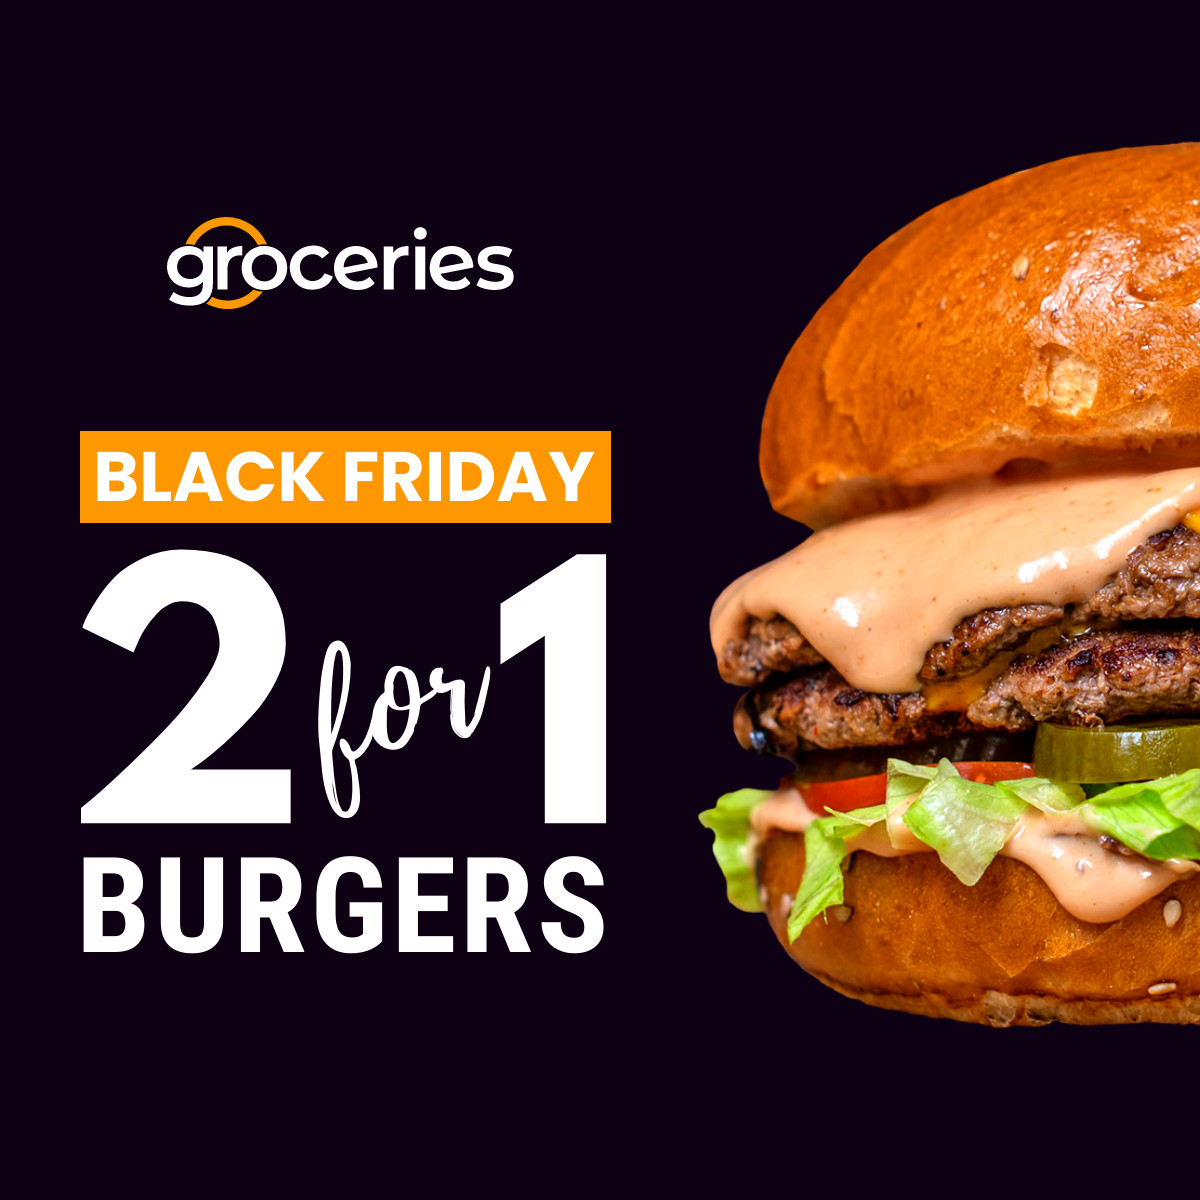 Black Friday 2 for 1 Burgers